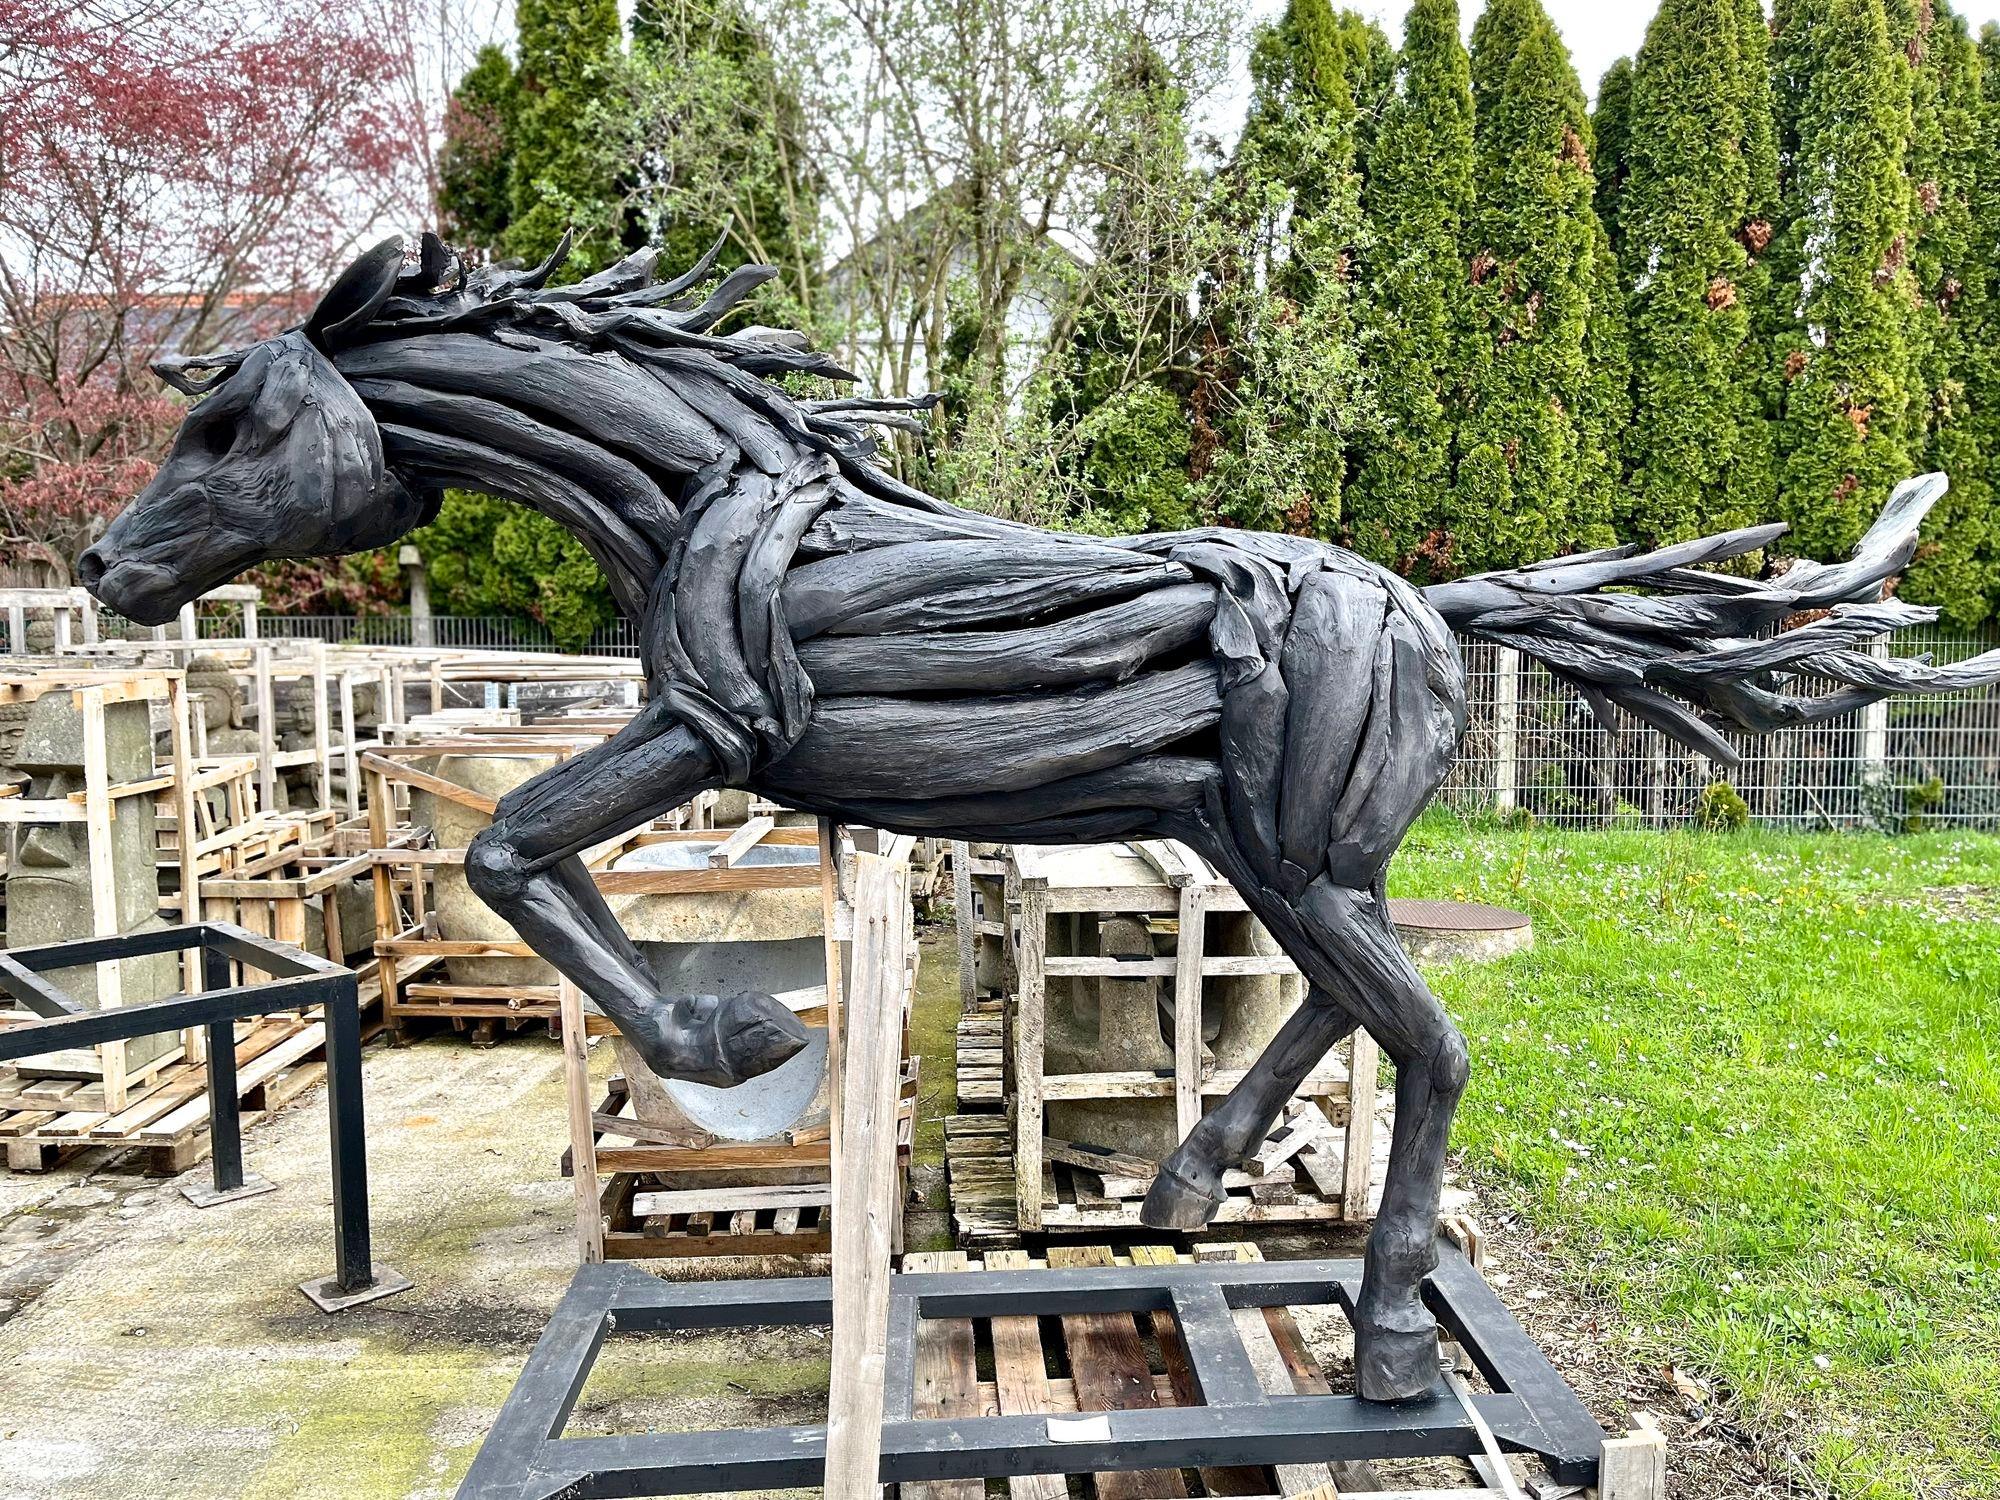 Outstanding lifesize sculpture of a spriting mustang artfully handcrafted by an exceptional indonesian artist. Elaborately created out of unique handpicked driftwood pieces that were collected on the beaches, this horse impresses with absolute